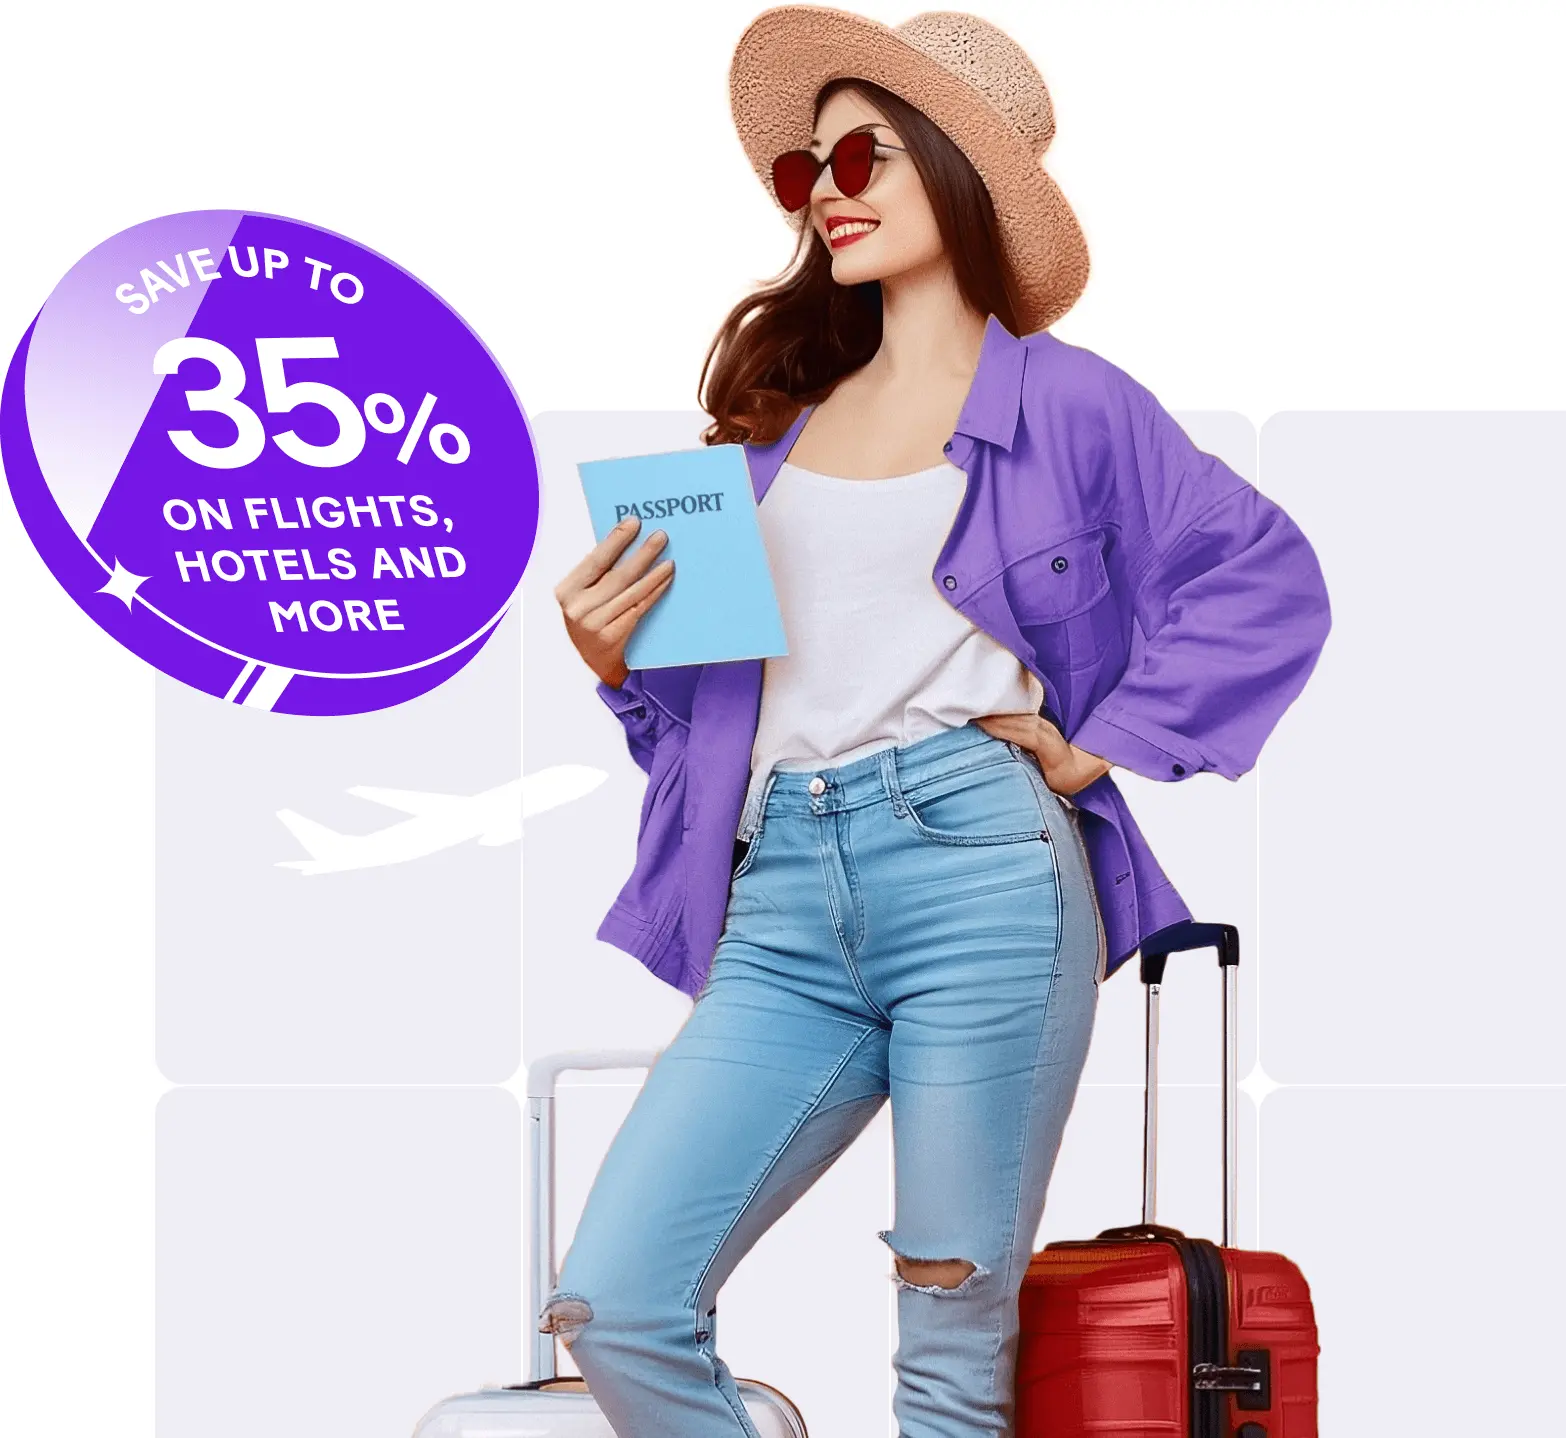 Save up to 35% on flights, hotels and more